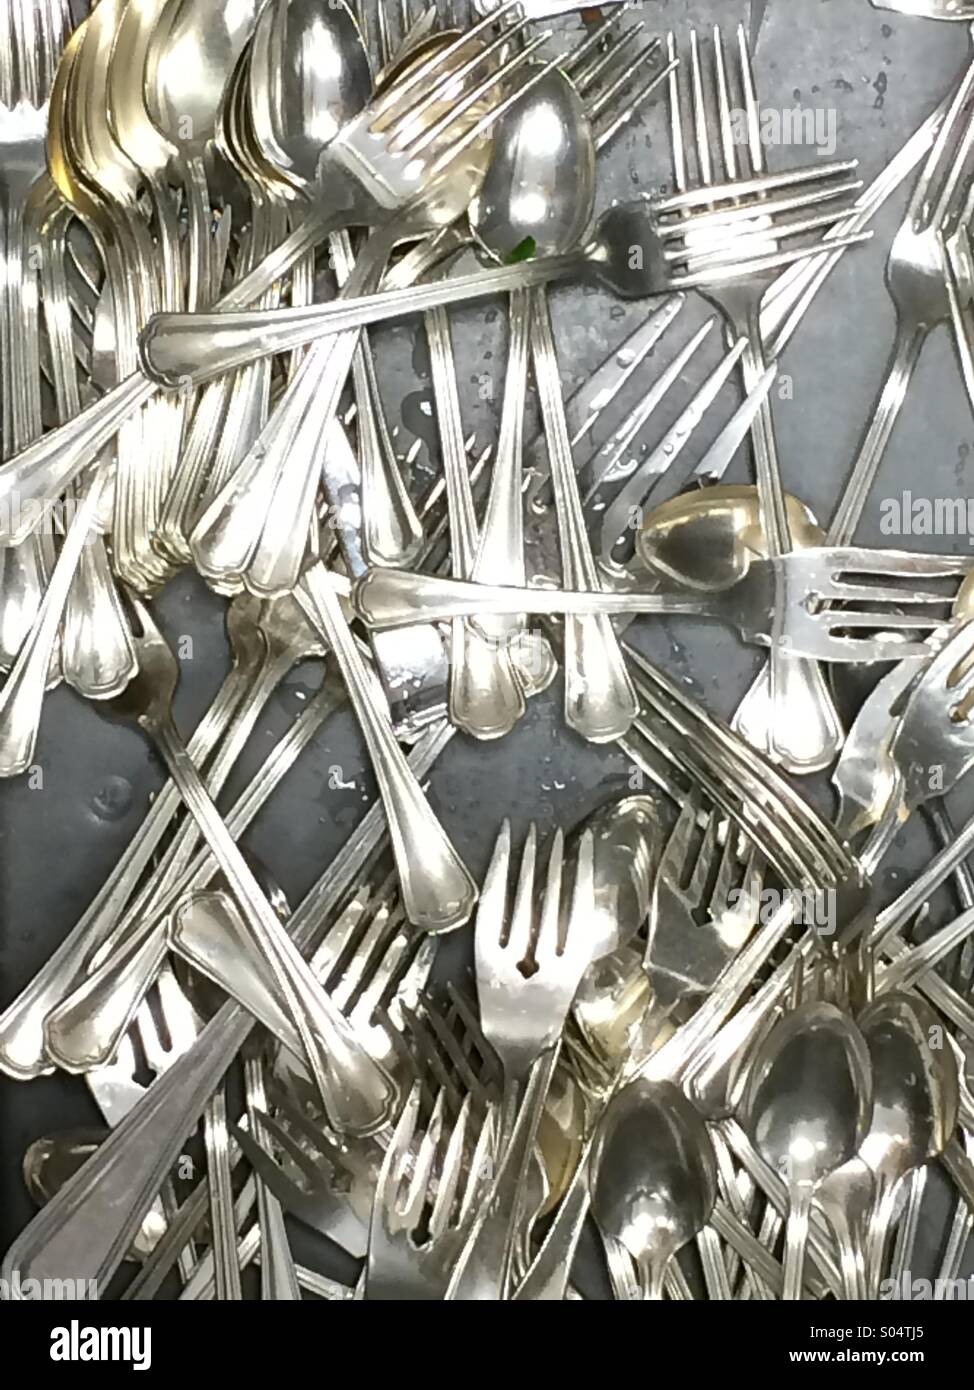 Forks & Spoons Stock Photo